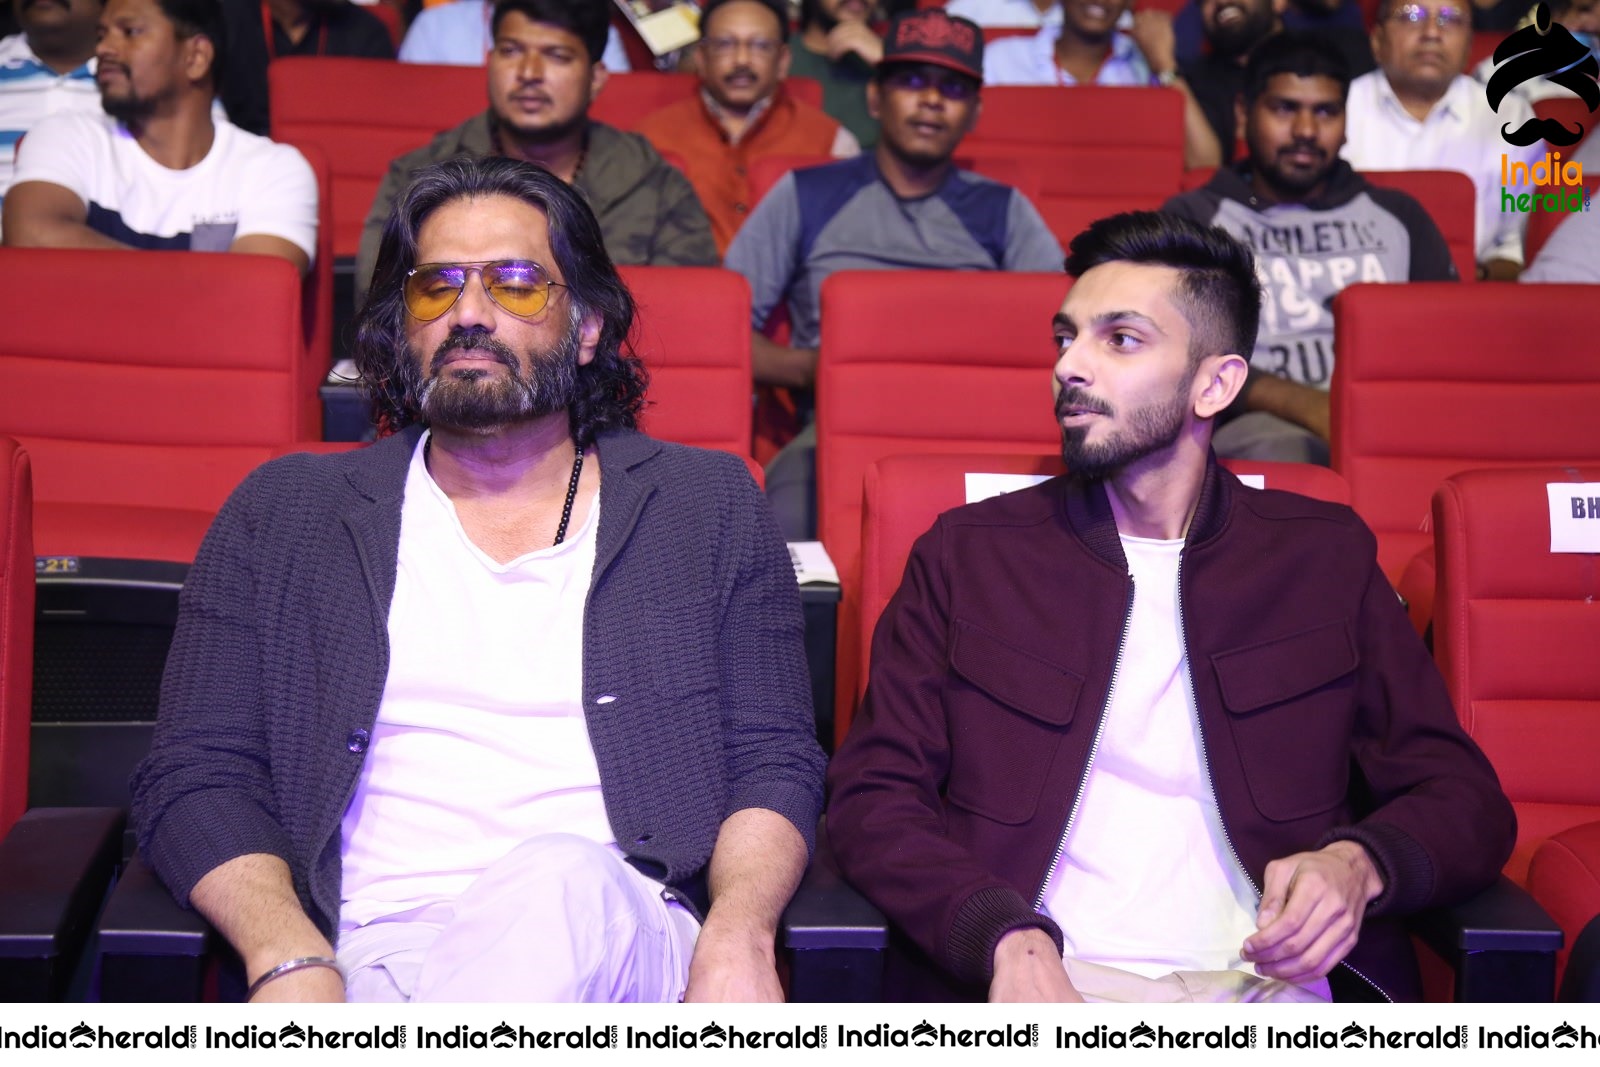 Actor Sunil Shetty Photos along with Music Composer Anirudh Set 2